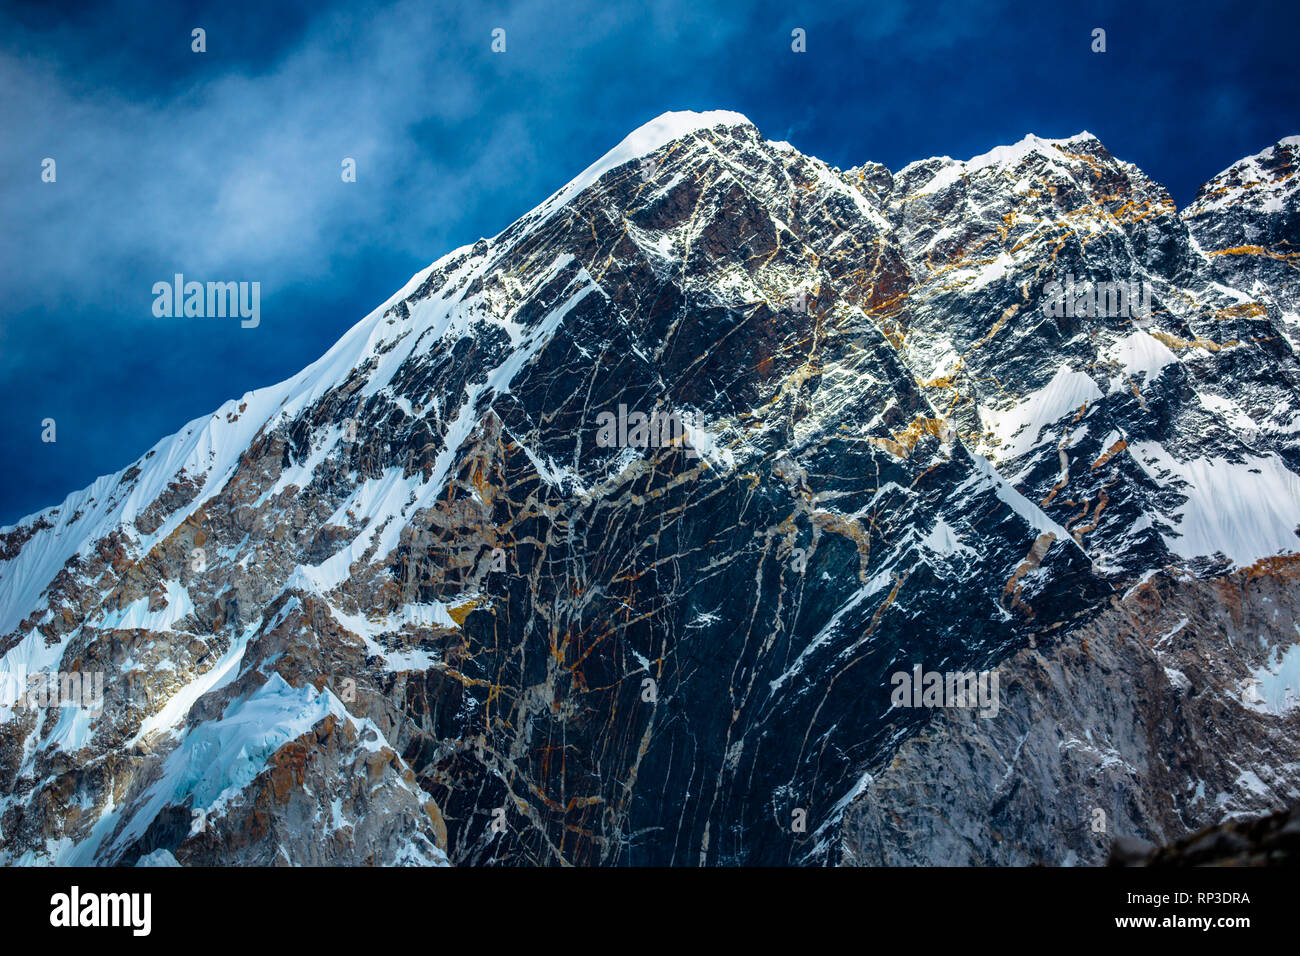 A mountain on the trek to Mount Everest in the Himalayas Stock Photo